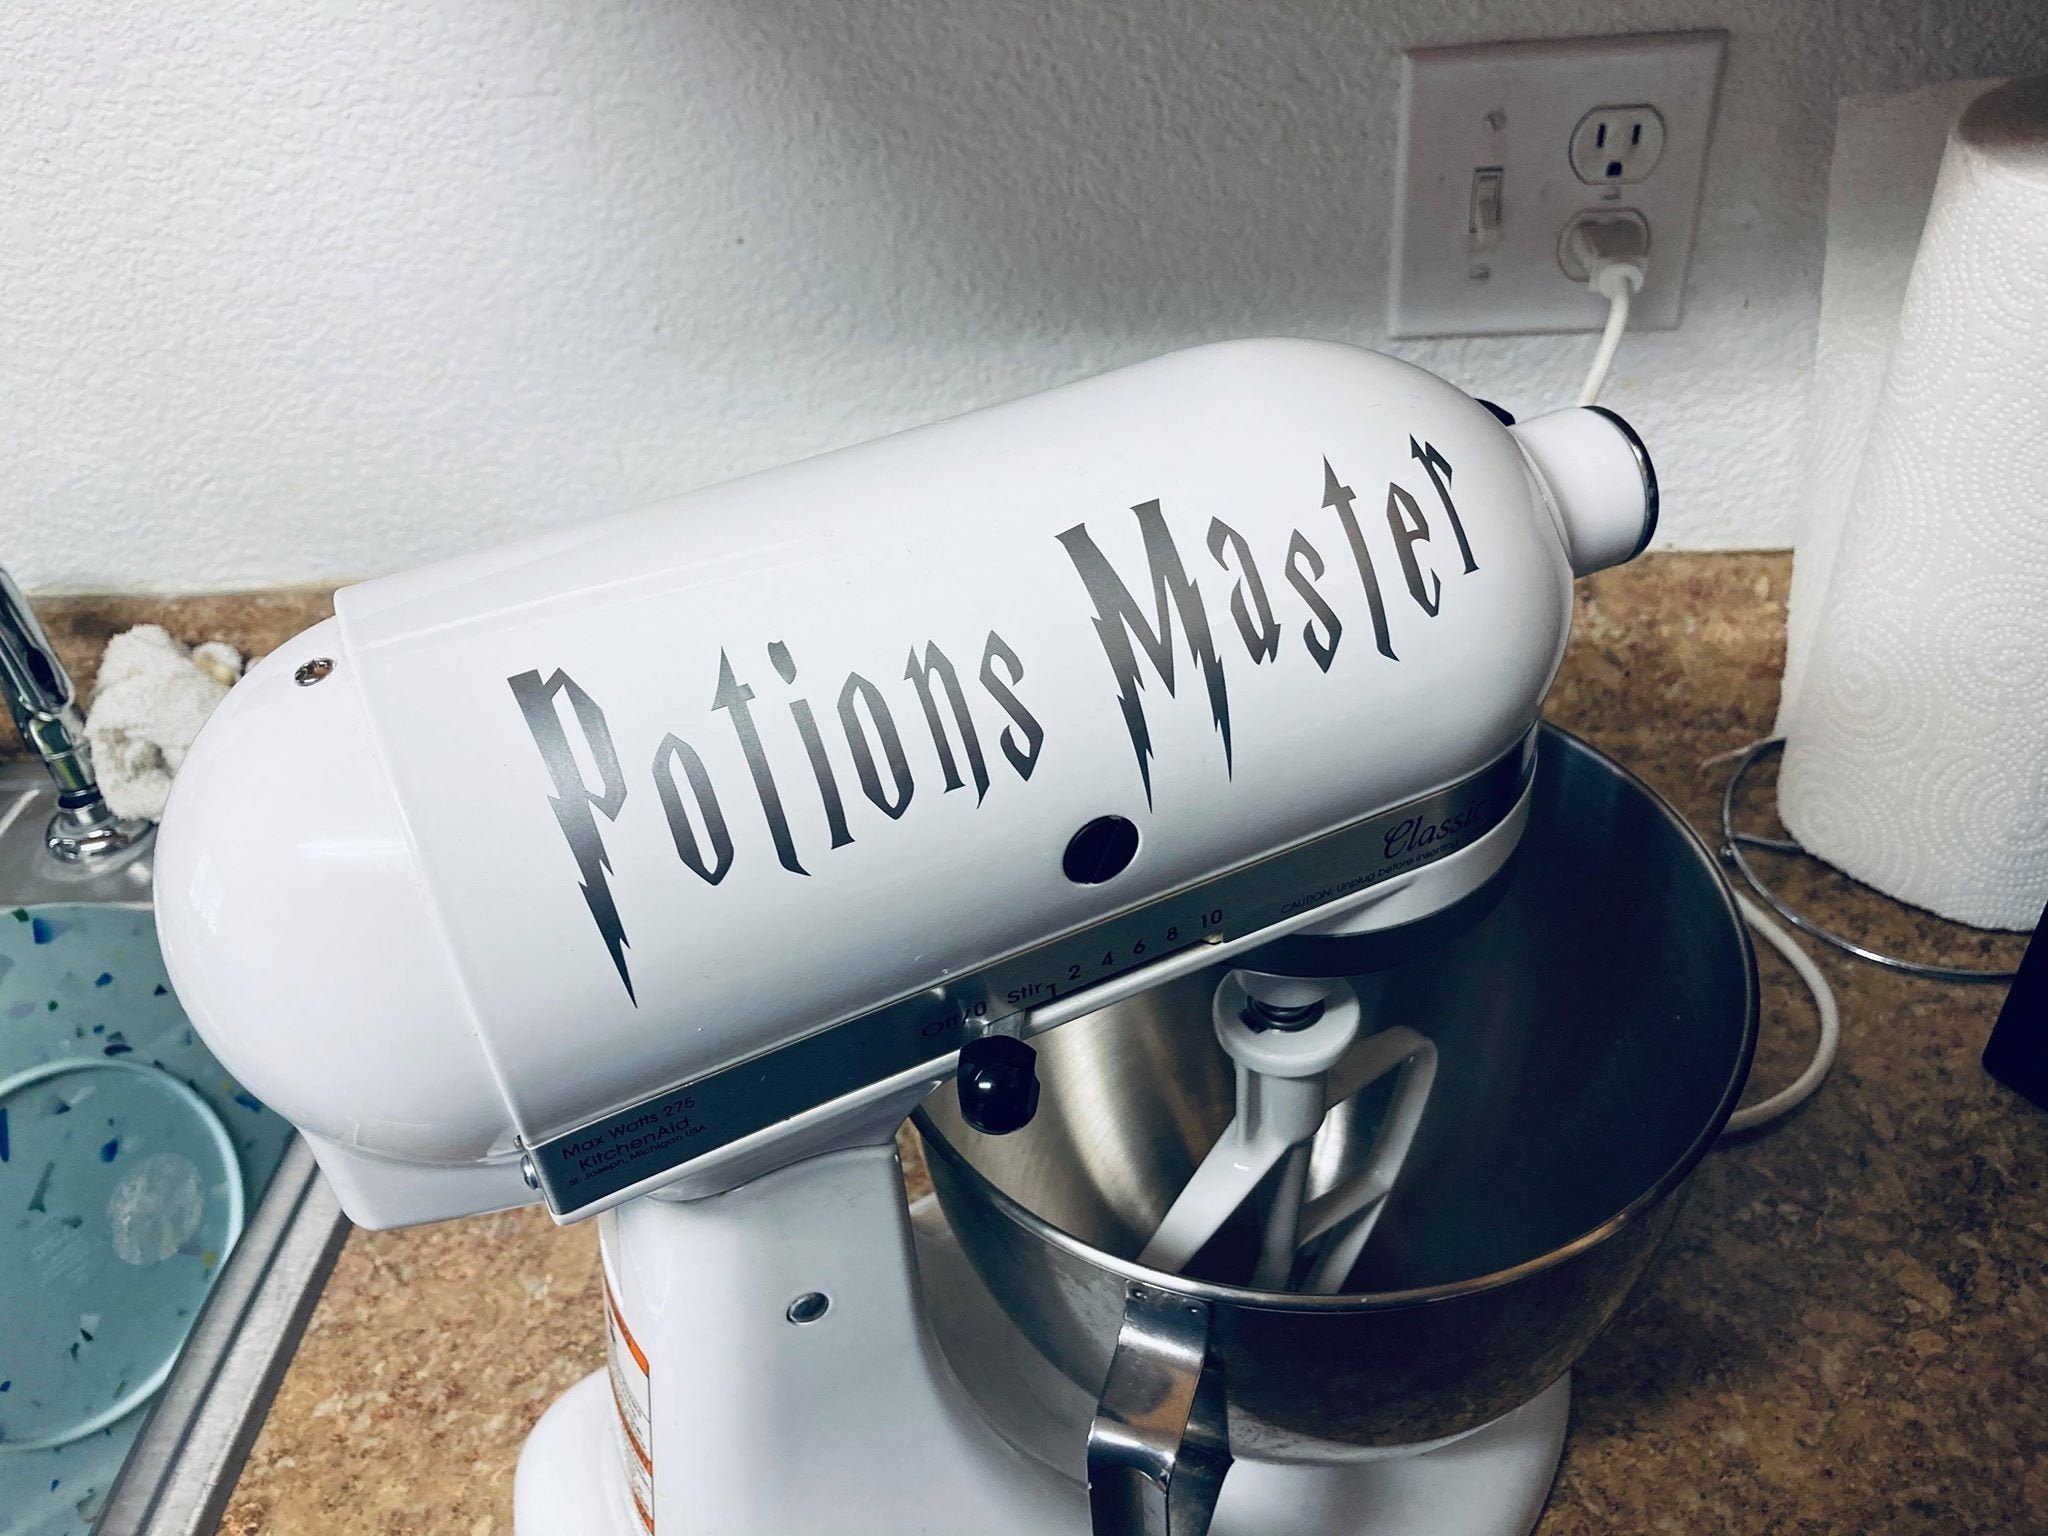 The Stand Mixer Decal Arrived - I Love It - The Art of Doing Stuff